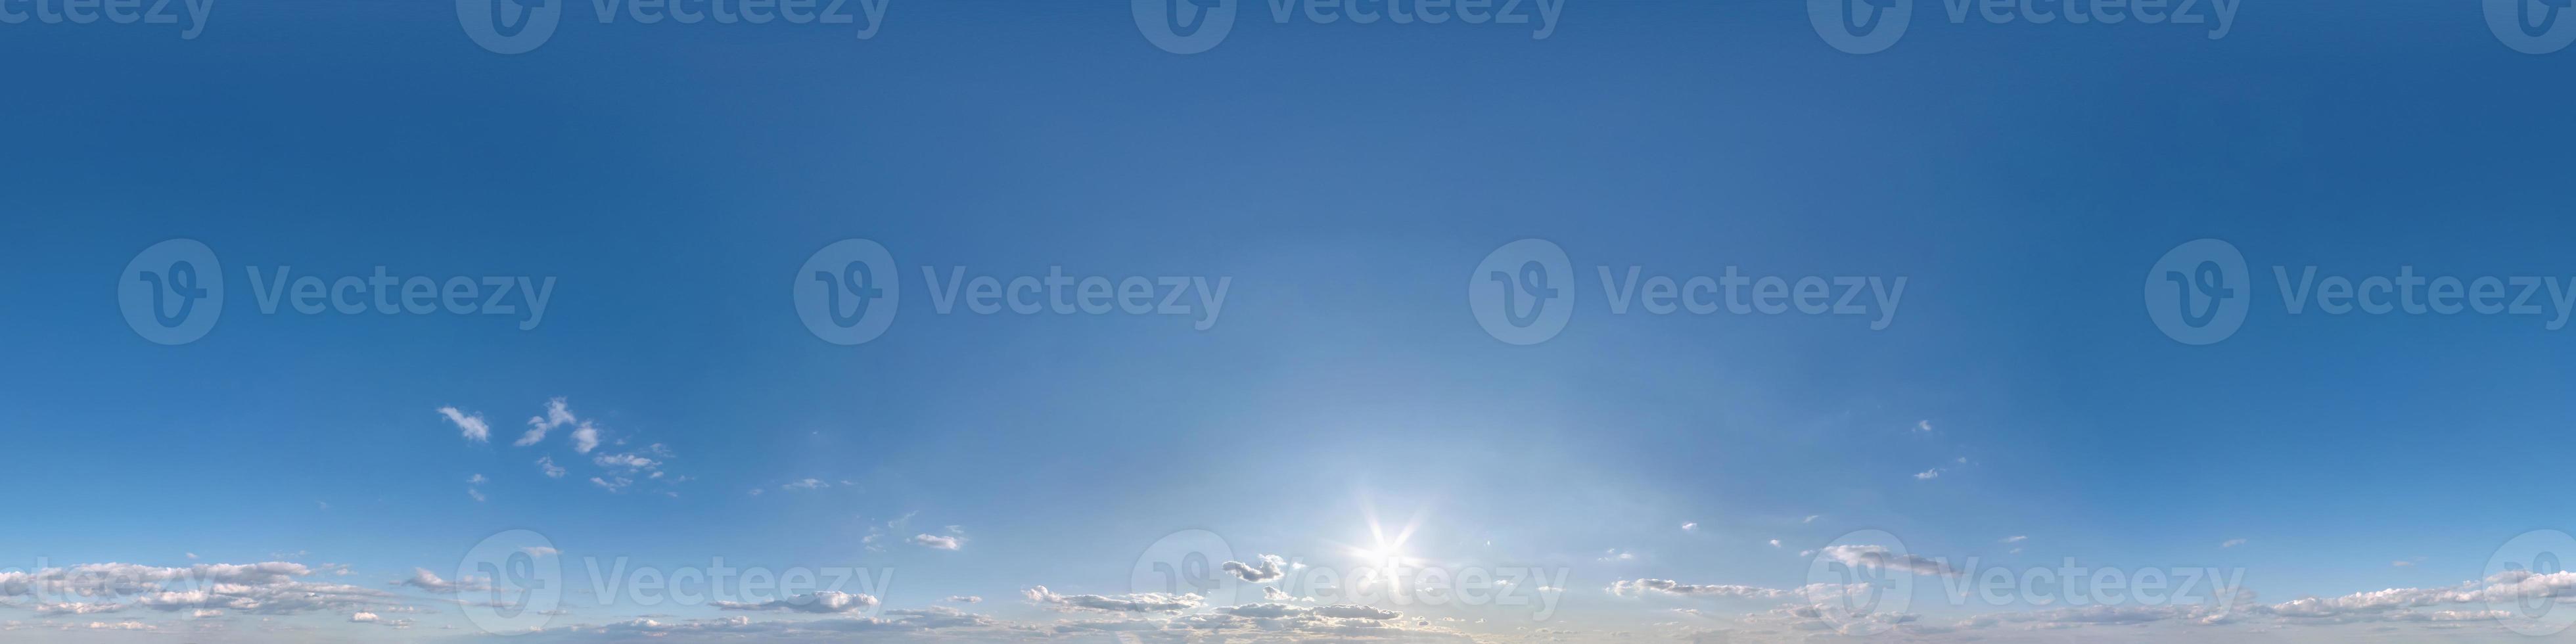 blue sky with beautiful fluffy cumulus clouds. Seamless hdri panorama 360 degrees angle view without ground for use in 3d graphics or game development as sky dome or edit drone shot photo